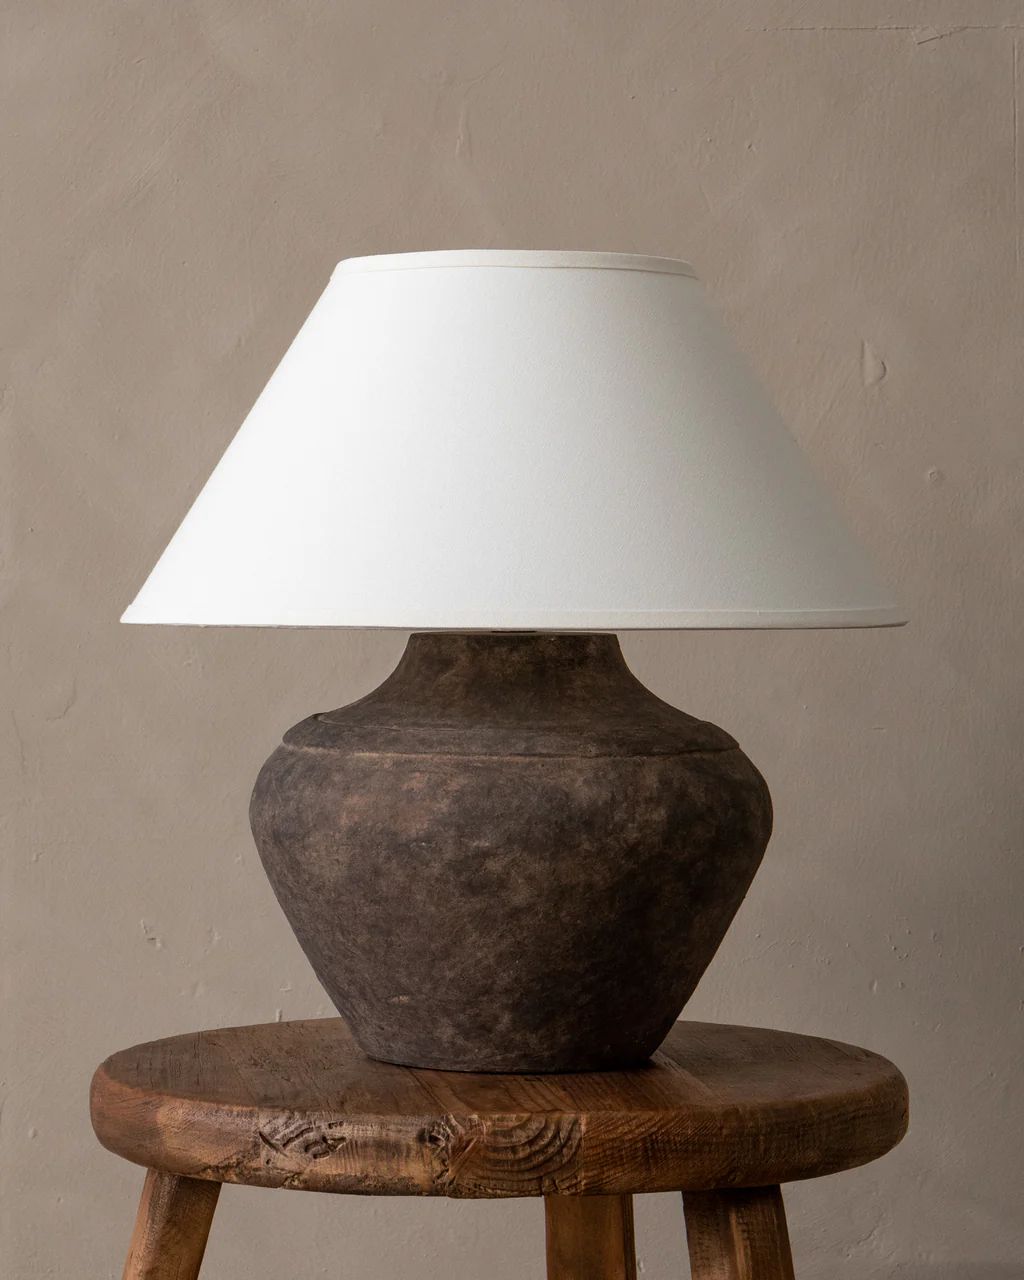 ATHERTON TABLE LAMP | The Vintage Rug Shop